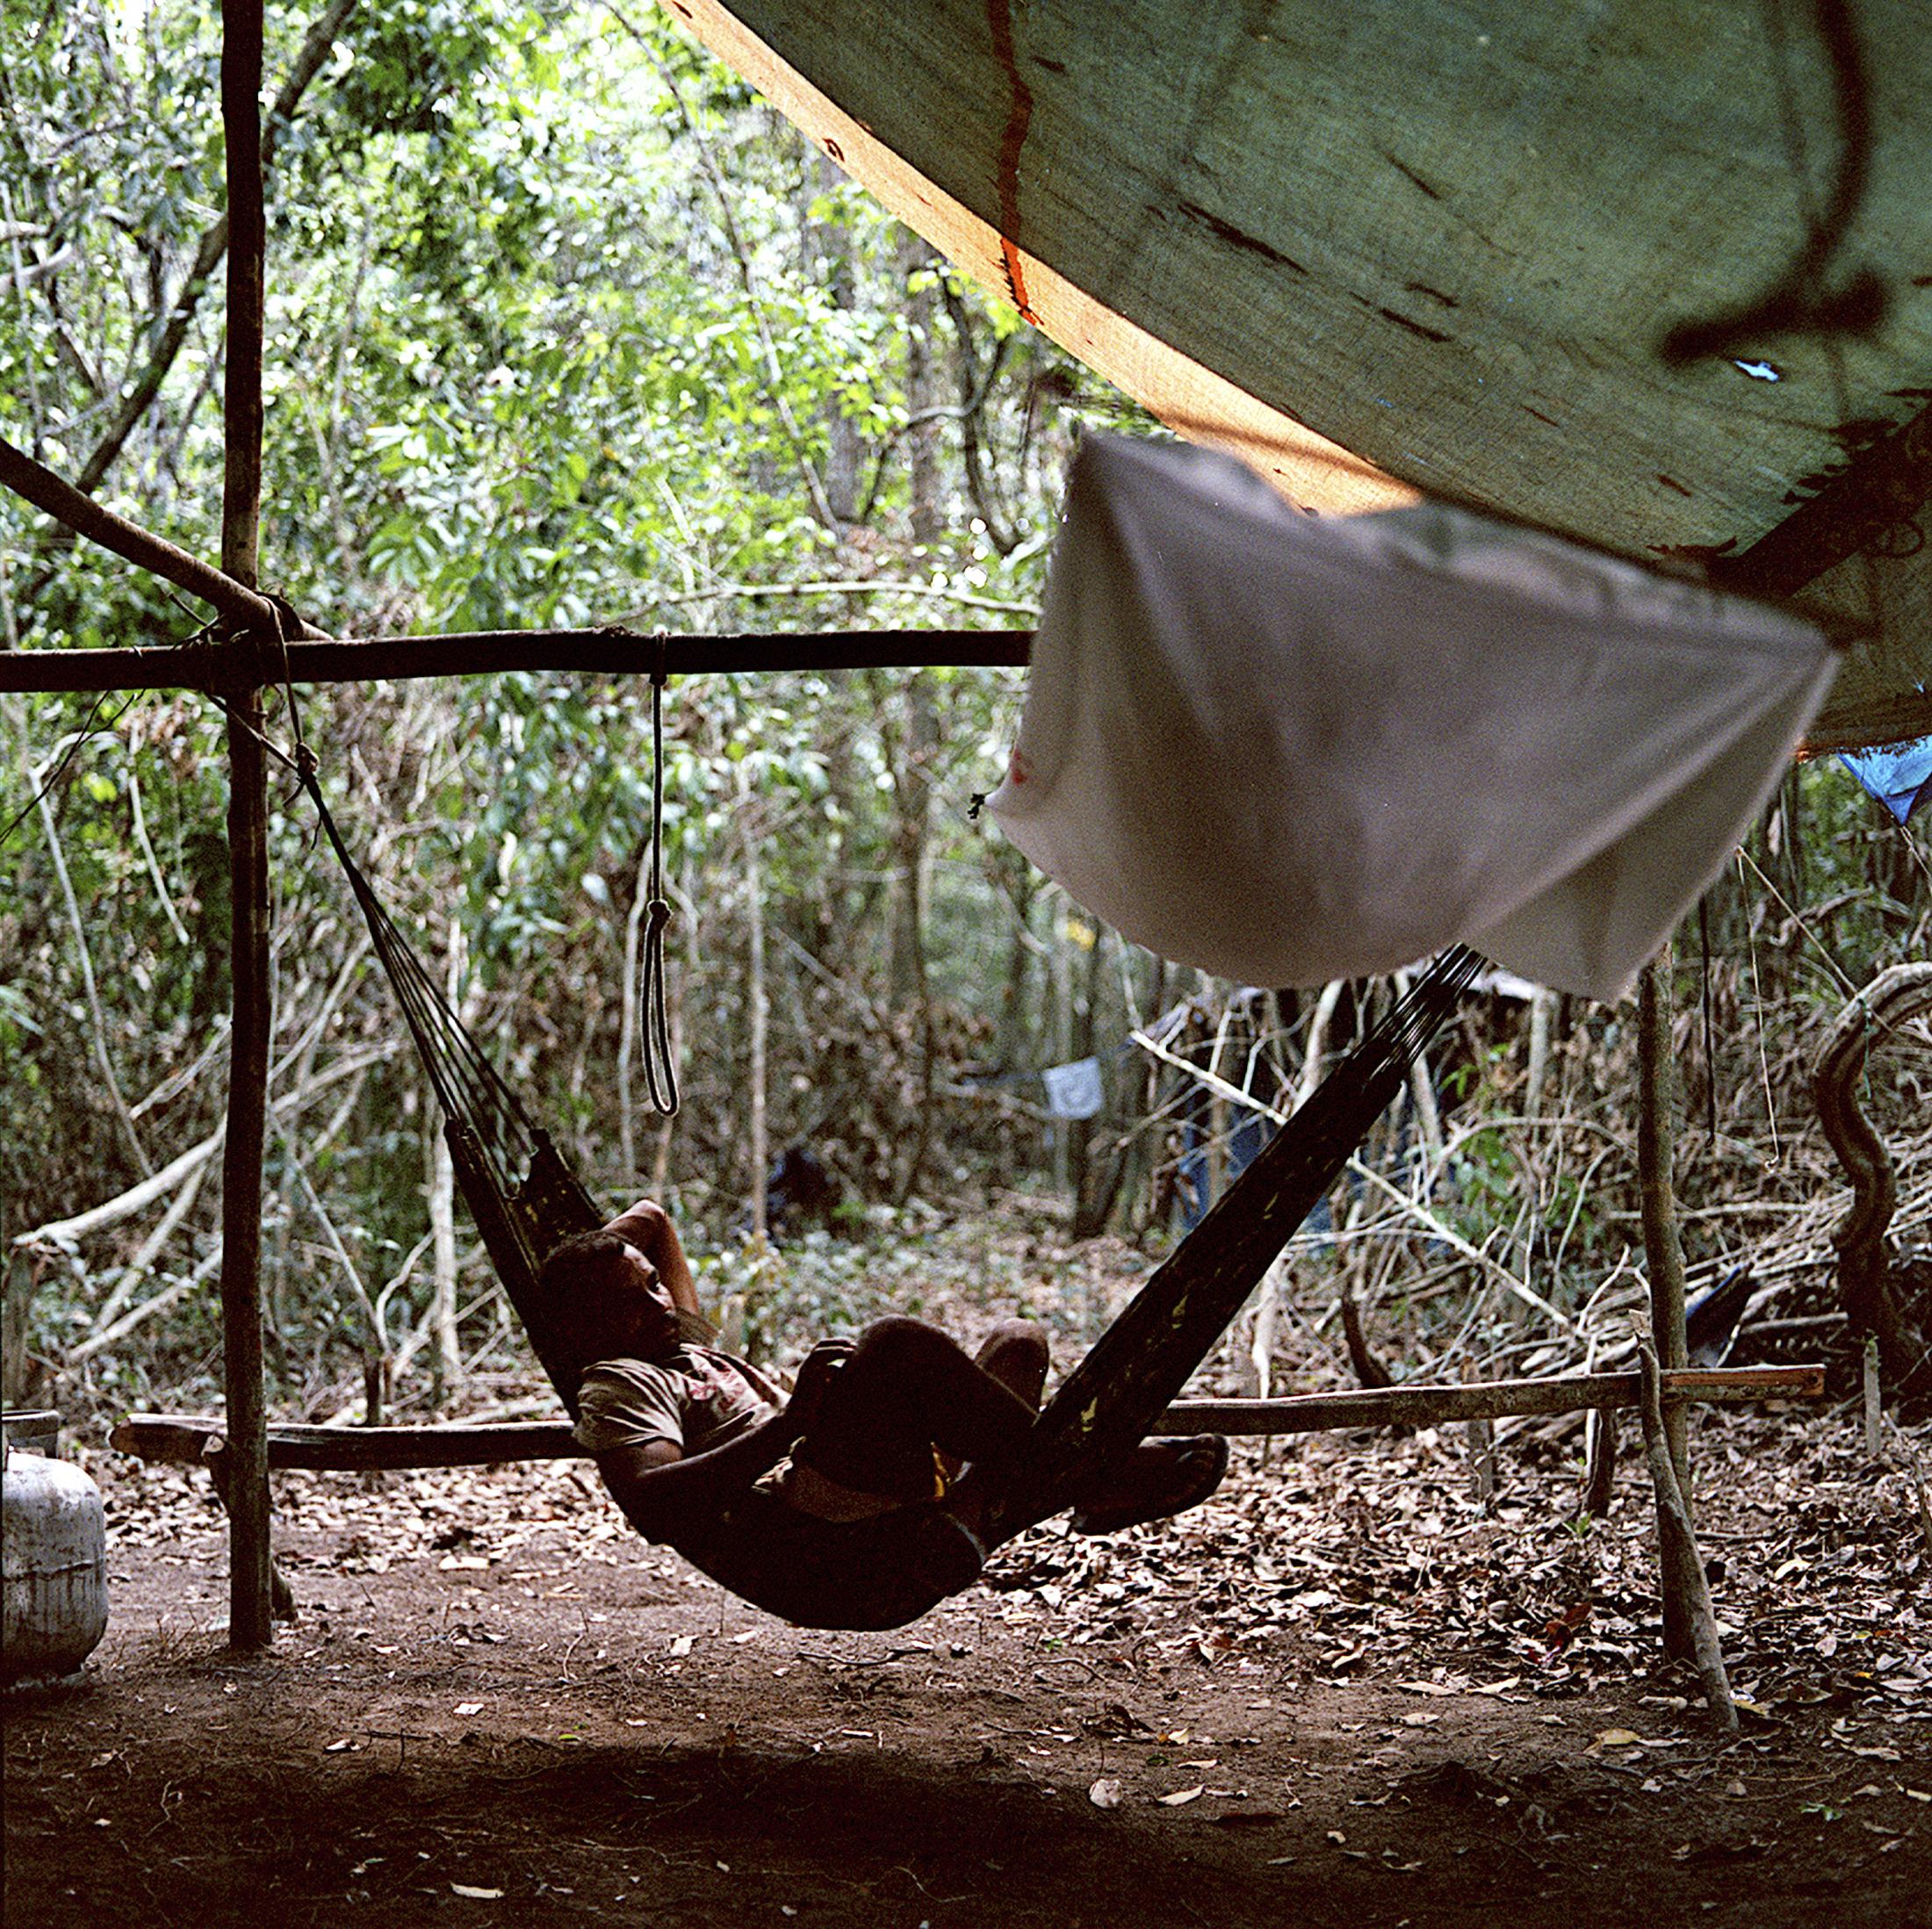 Terra do Meio - Illegal logger rests after work at a camp in Terra do Meio